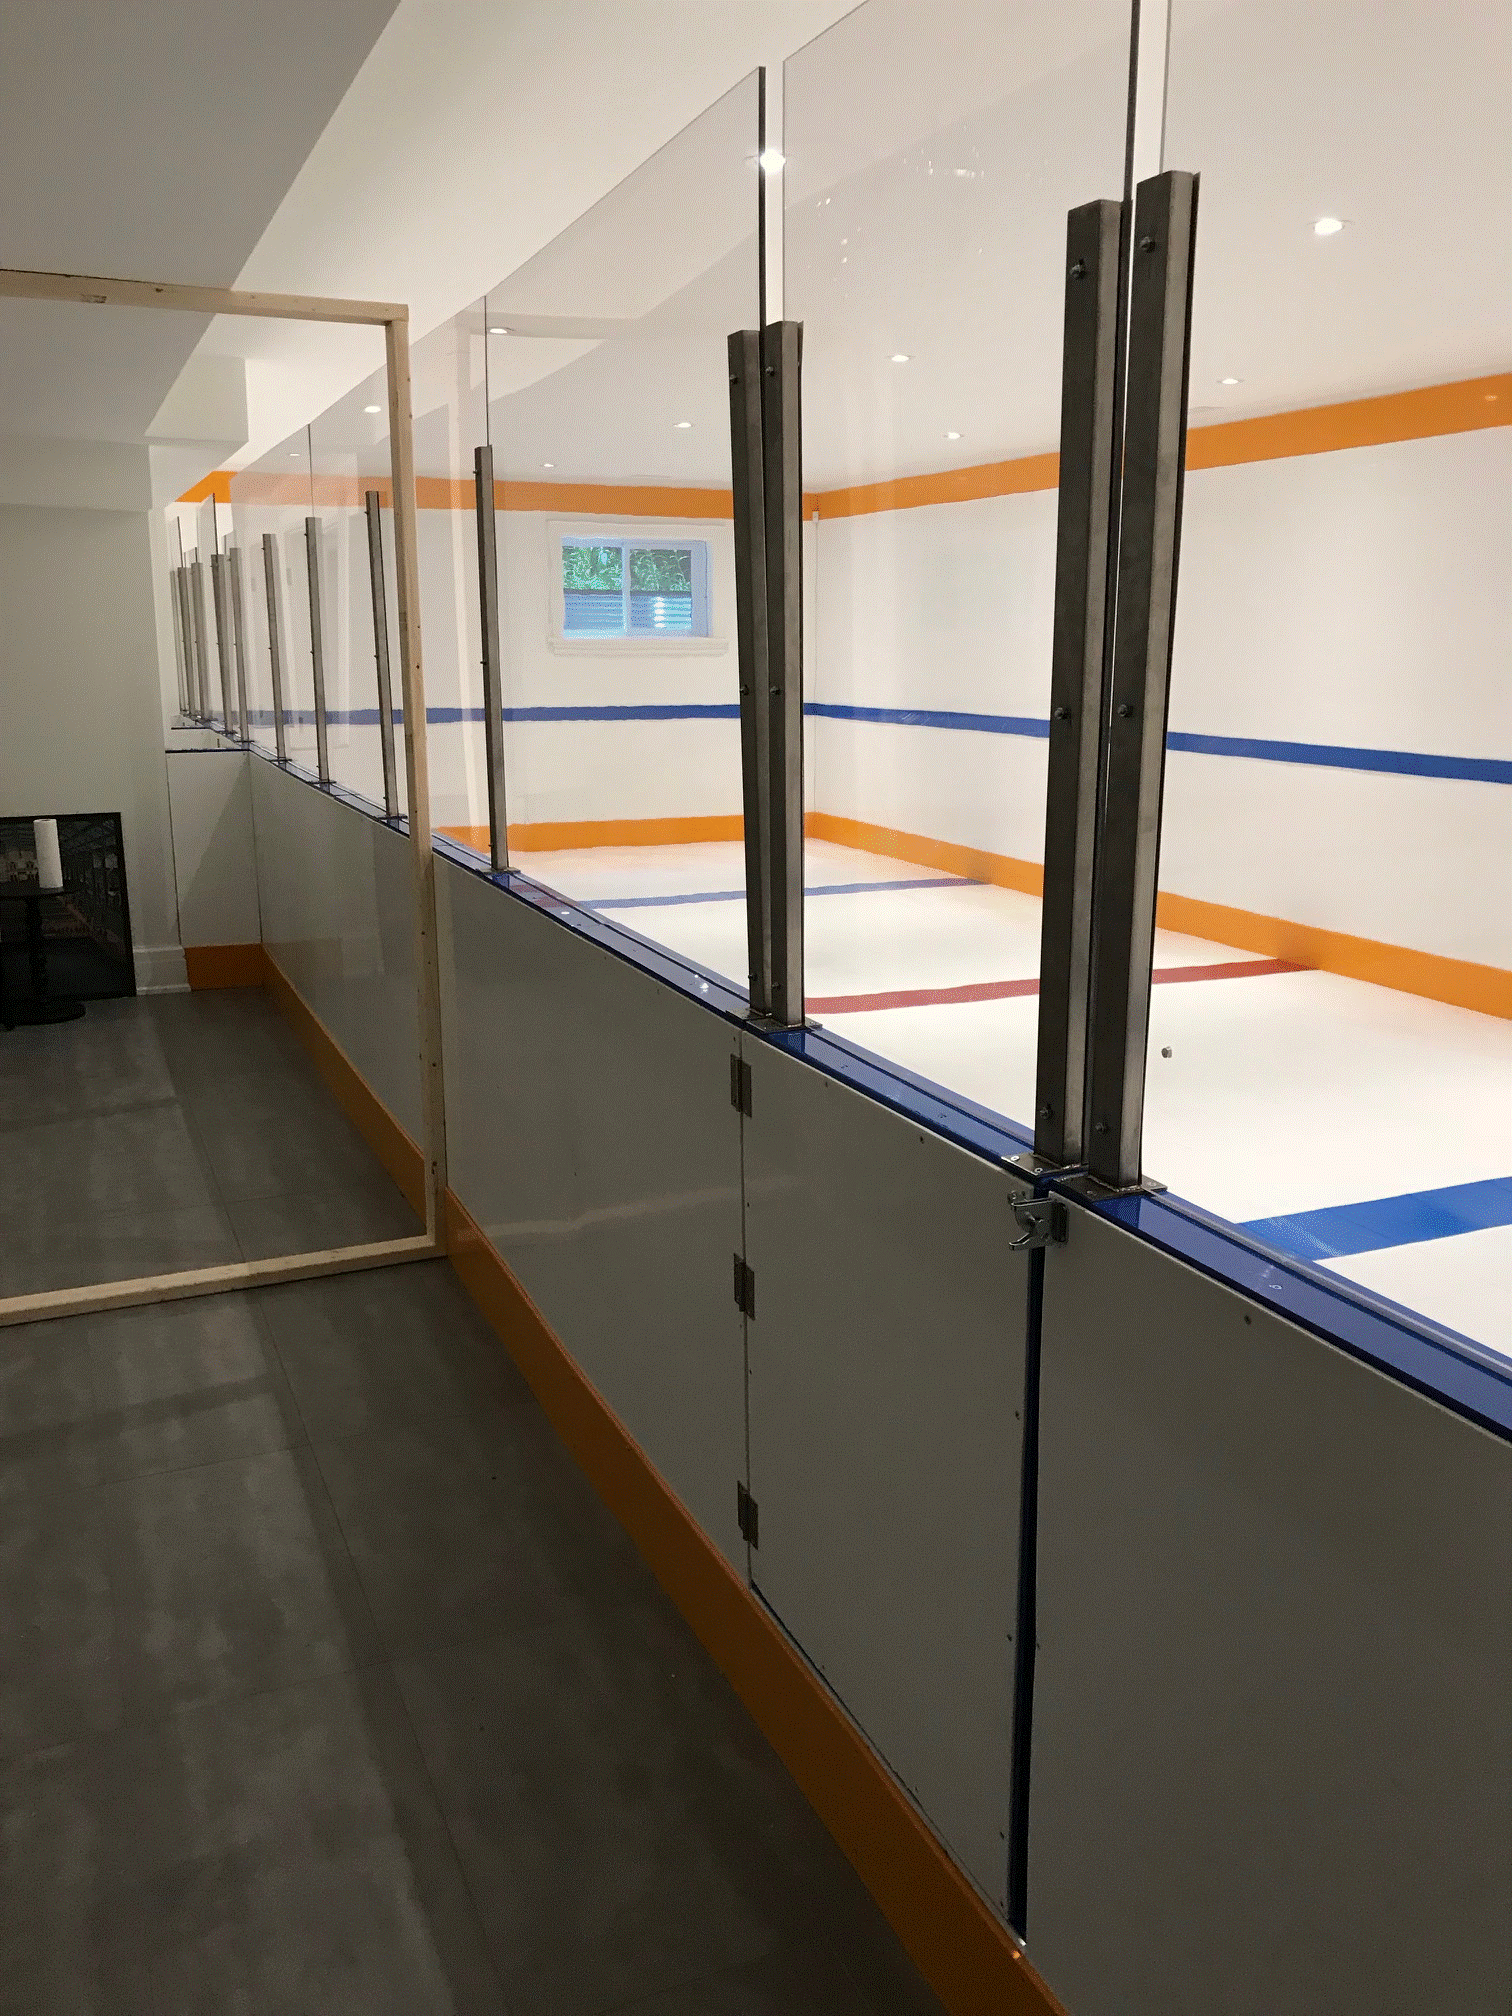 Basement rink with inline tiles and plexi-glass shielding